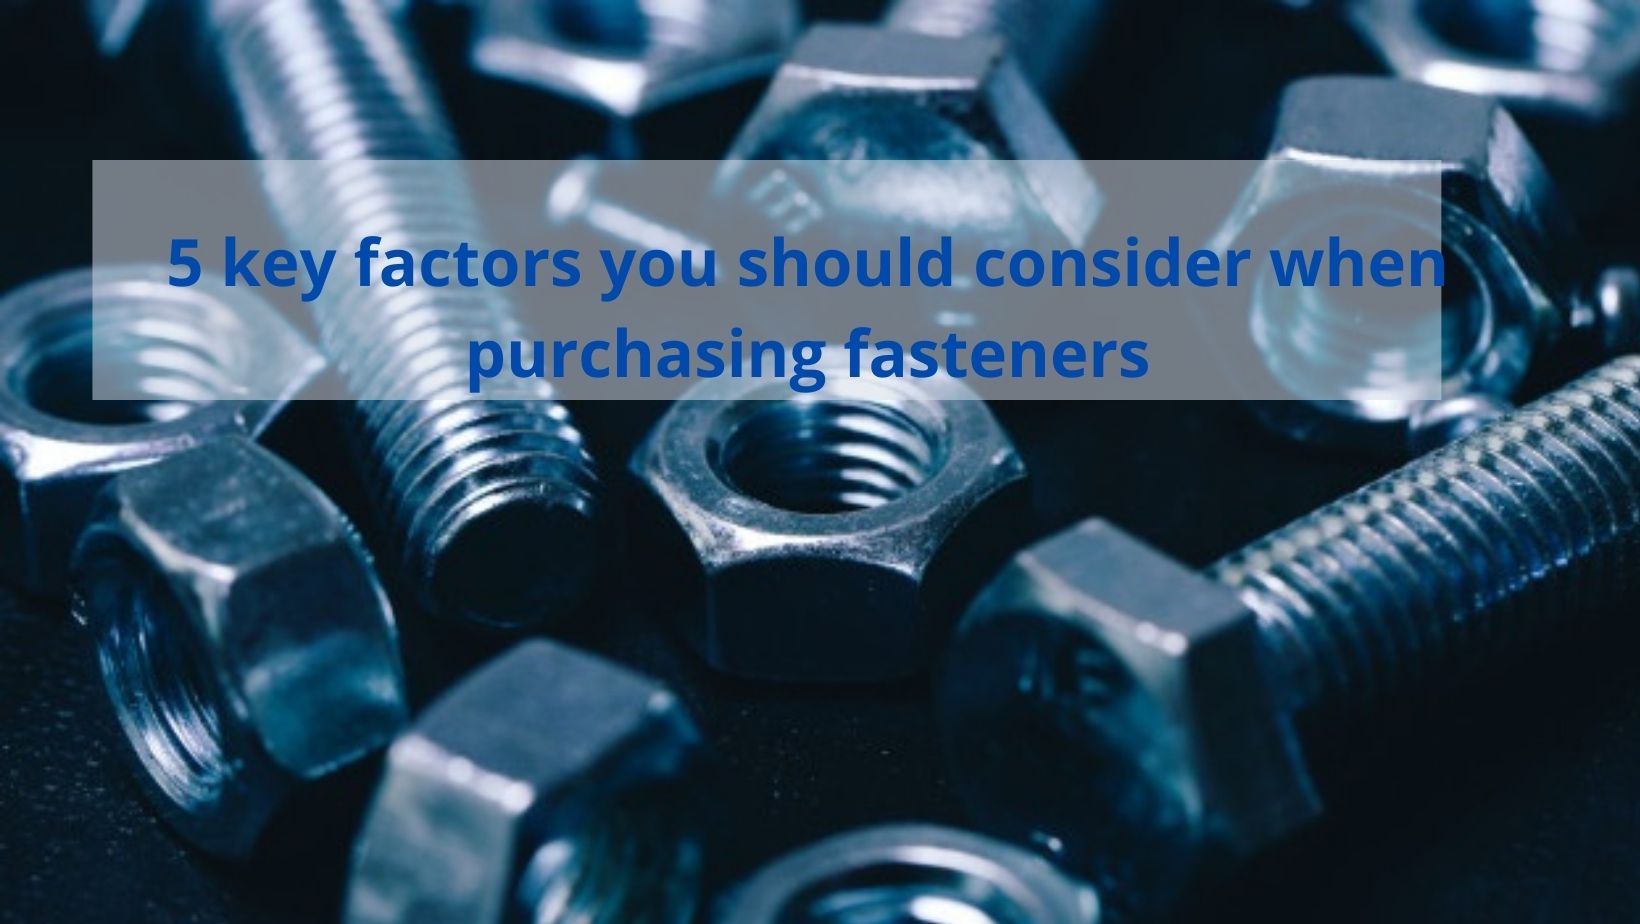 Visit Fabory and purchase Set screws and other fastener products for  quality and convenience.